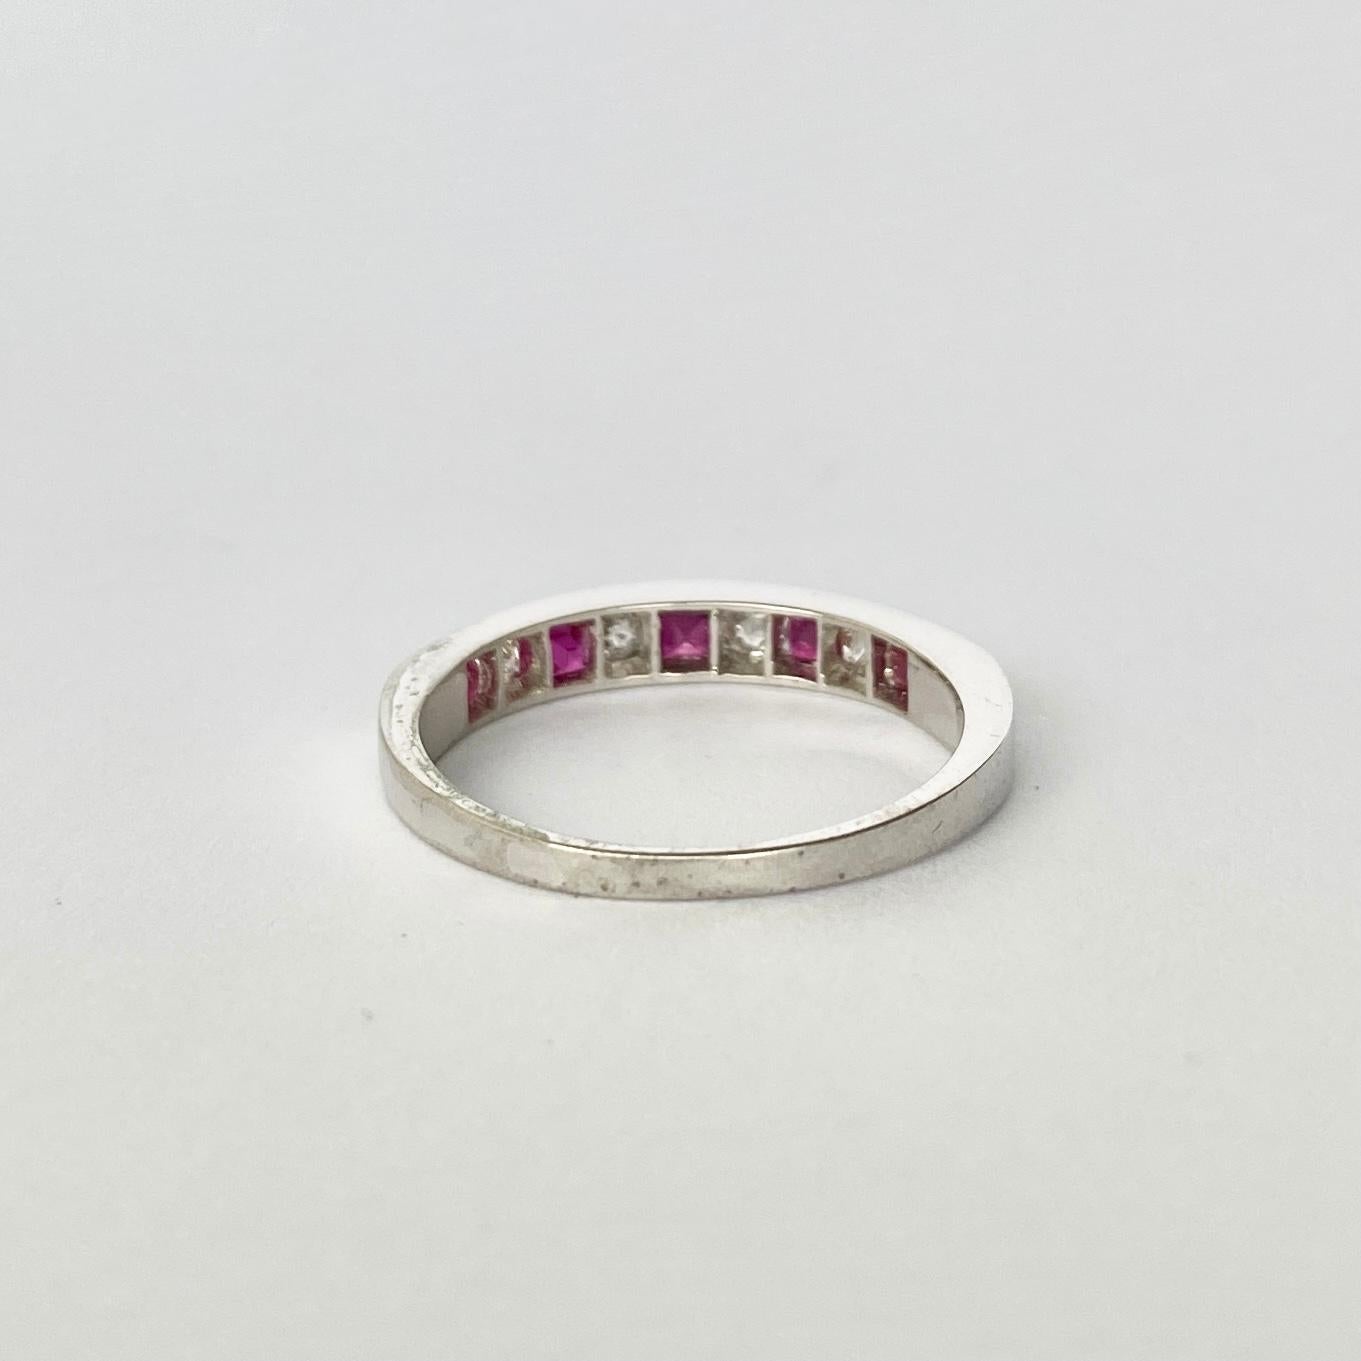 The stones are gorgeous in this band. The rubies are square cut and total 50pts and in-between these pairs of red stones are bright round cut diamonds totalling 20pts. The stones are set in platinum.

Ring Size: N or 6 3/4 
Band Width: 3mm

Weight: